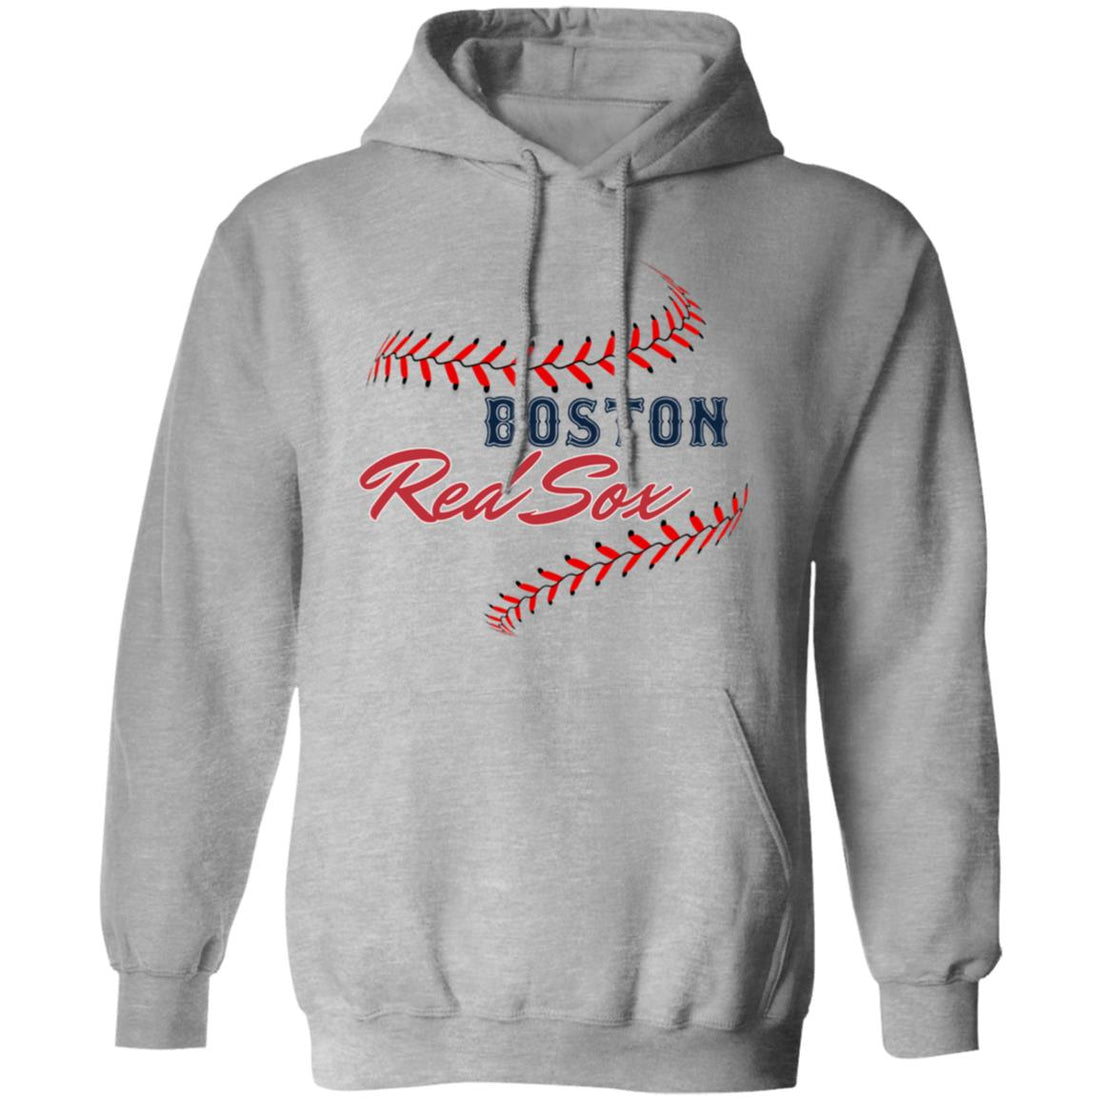 Red Sox Stitches Hoodie - Sweatshirts - Positively Sassy - Red Sox Stitches Hoodie